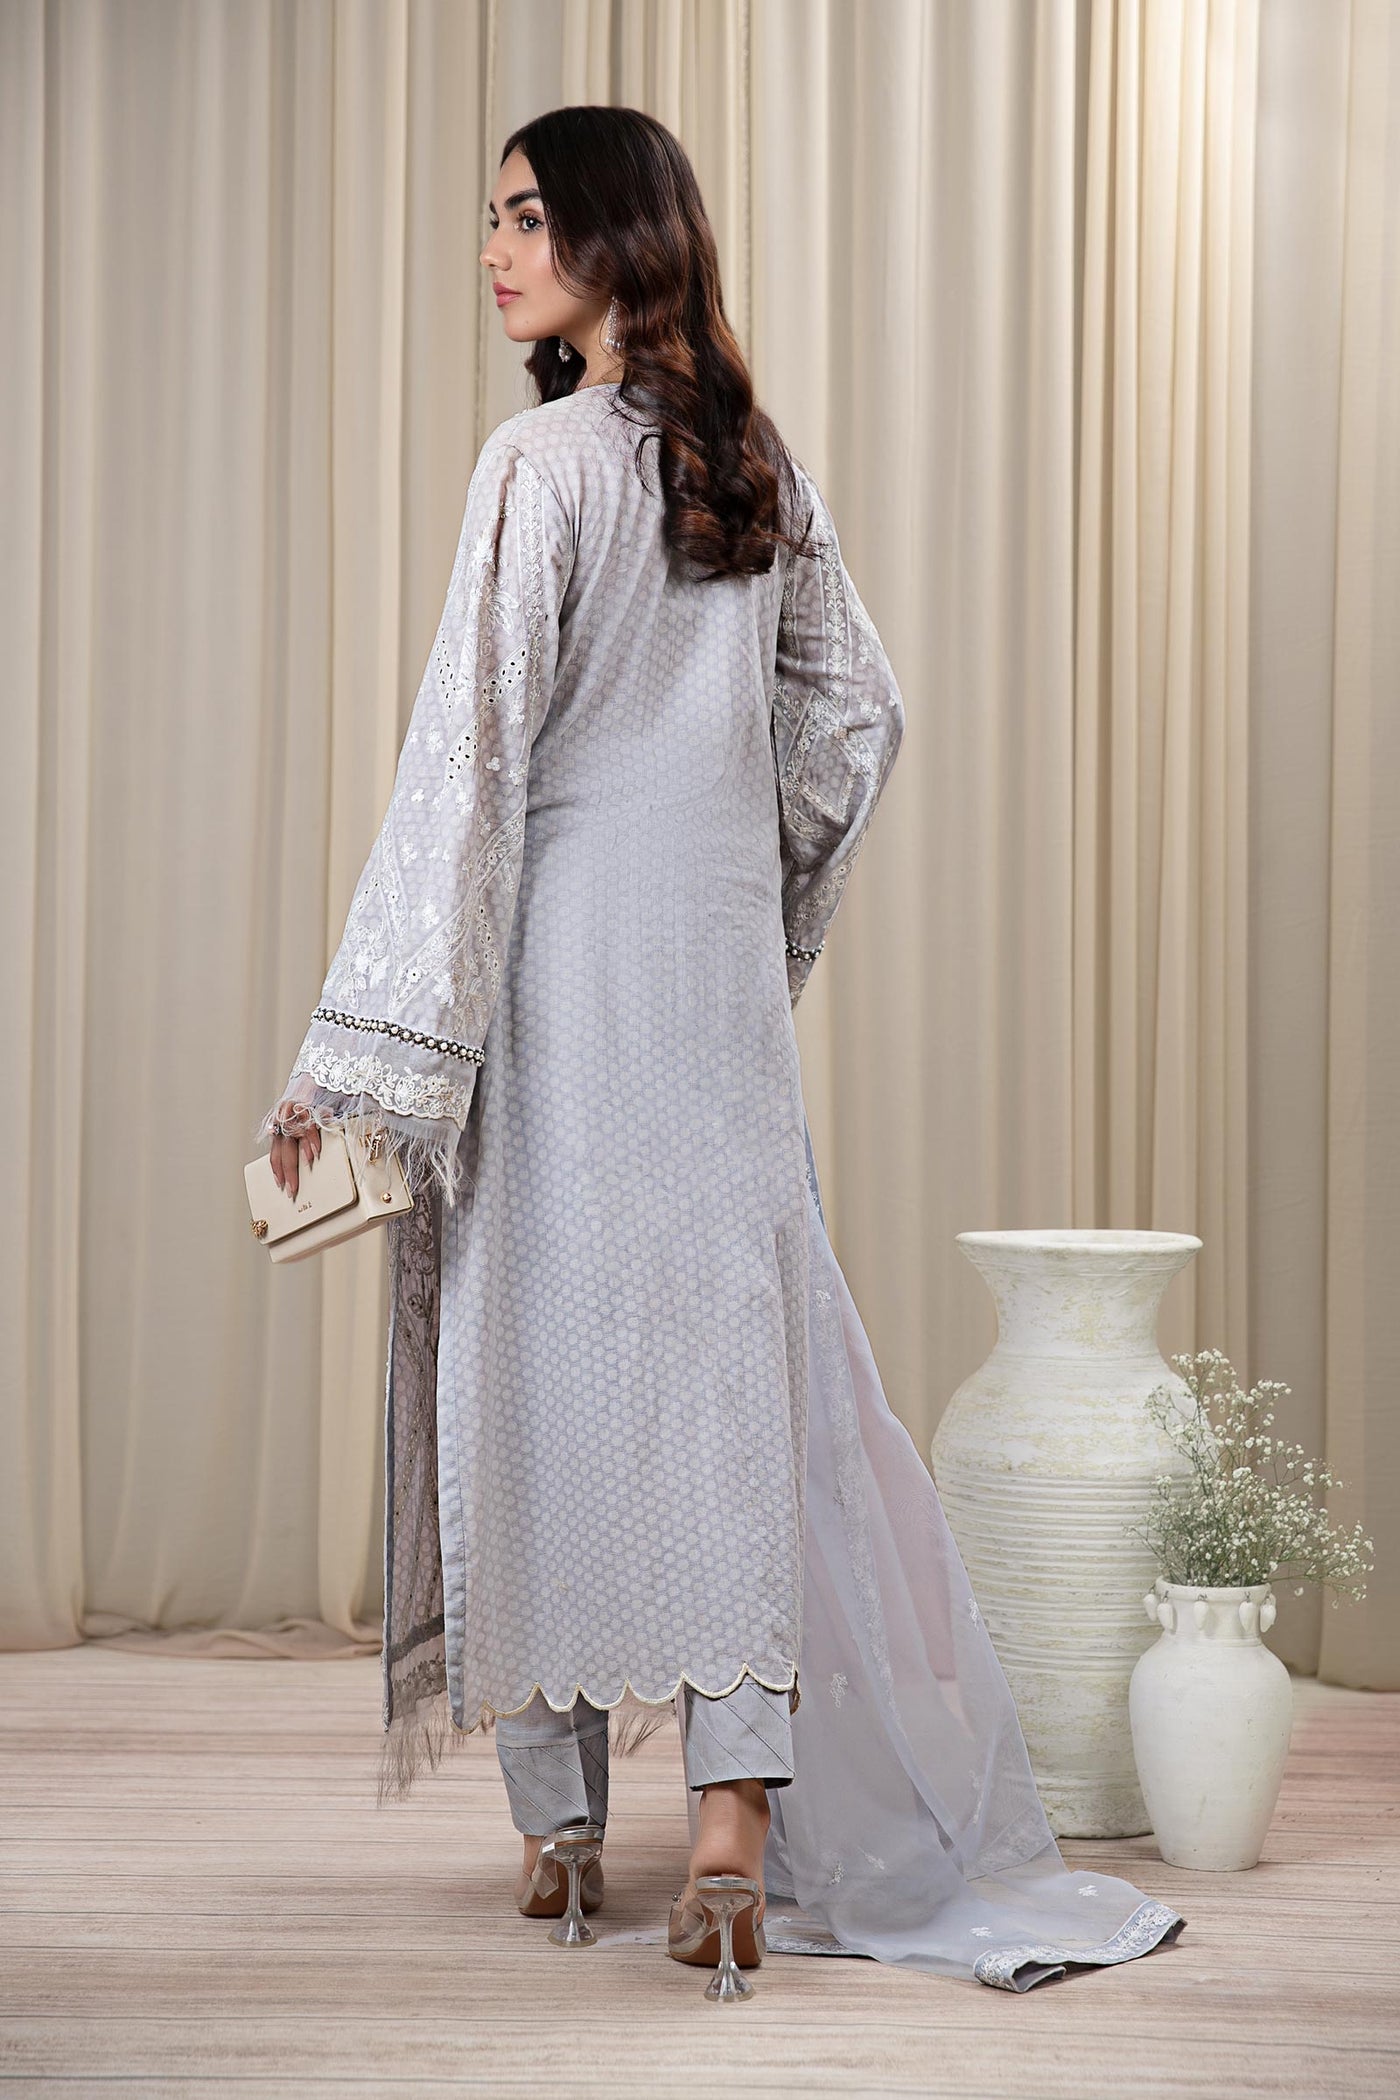 3 PIECE EMBROIDERED SELF JACQUARD SUIT | DW-EF24-32